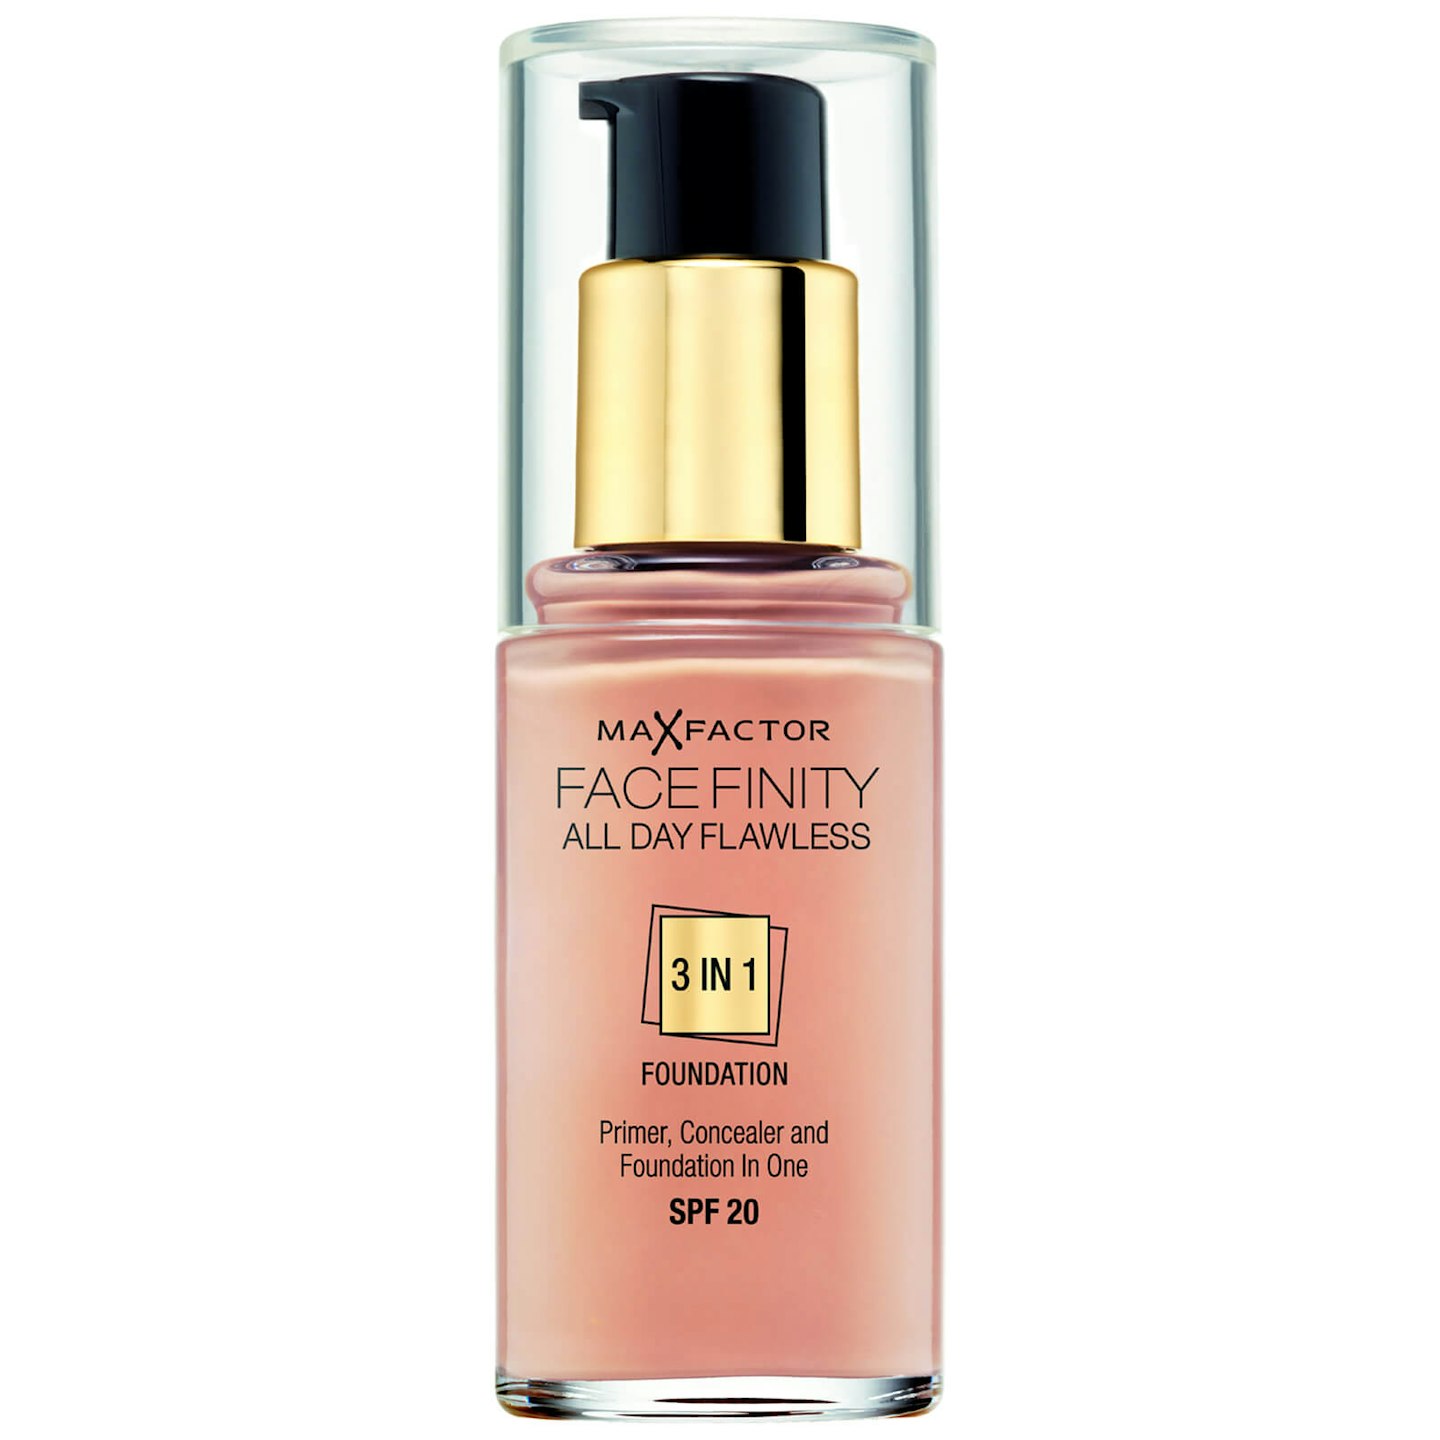 Max Factor, Facefinity All Day Flawless 3 in 1 Foundation, £12.99